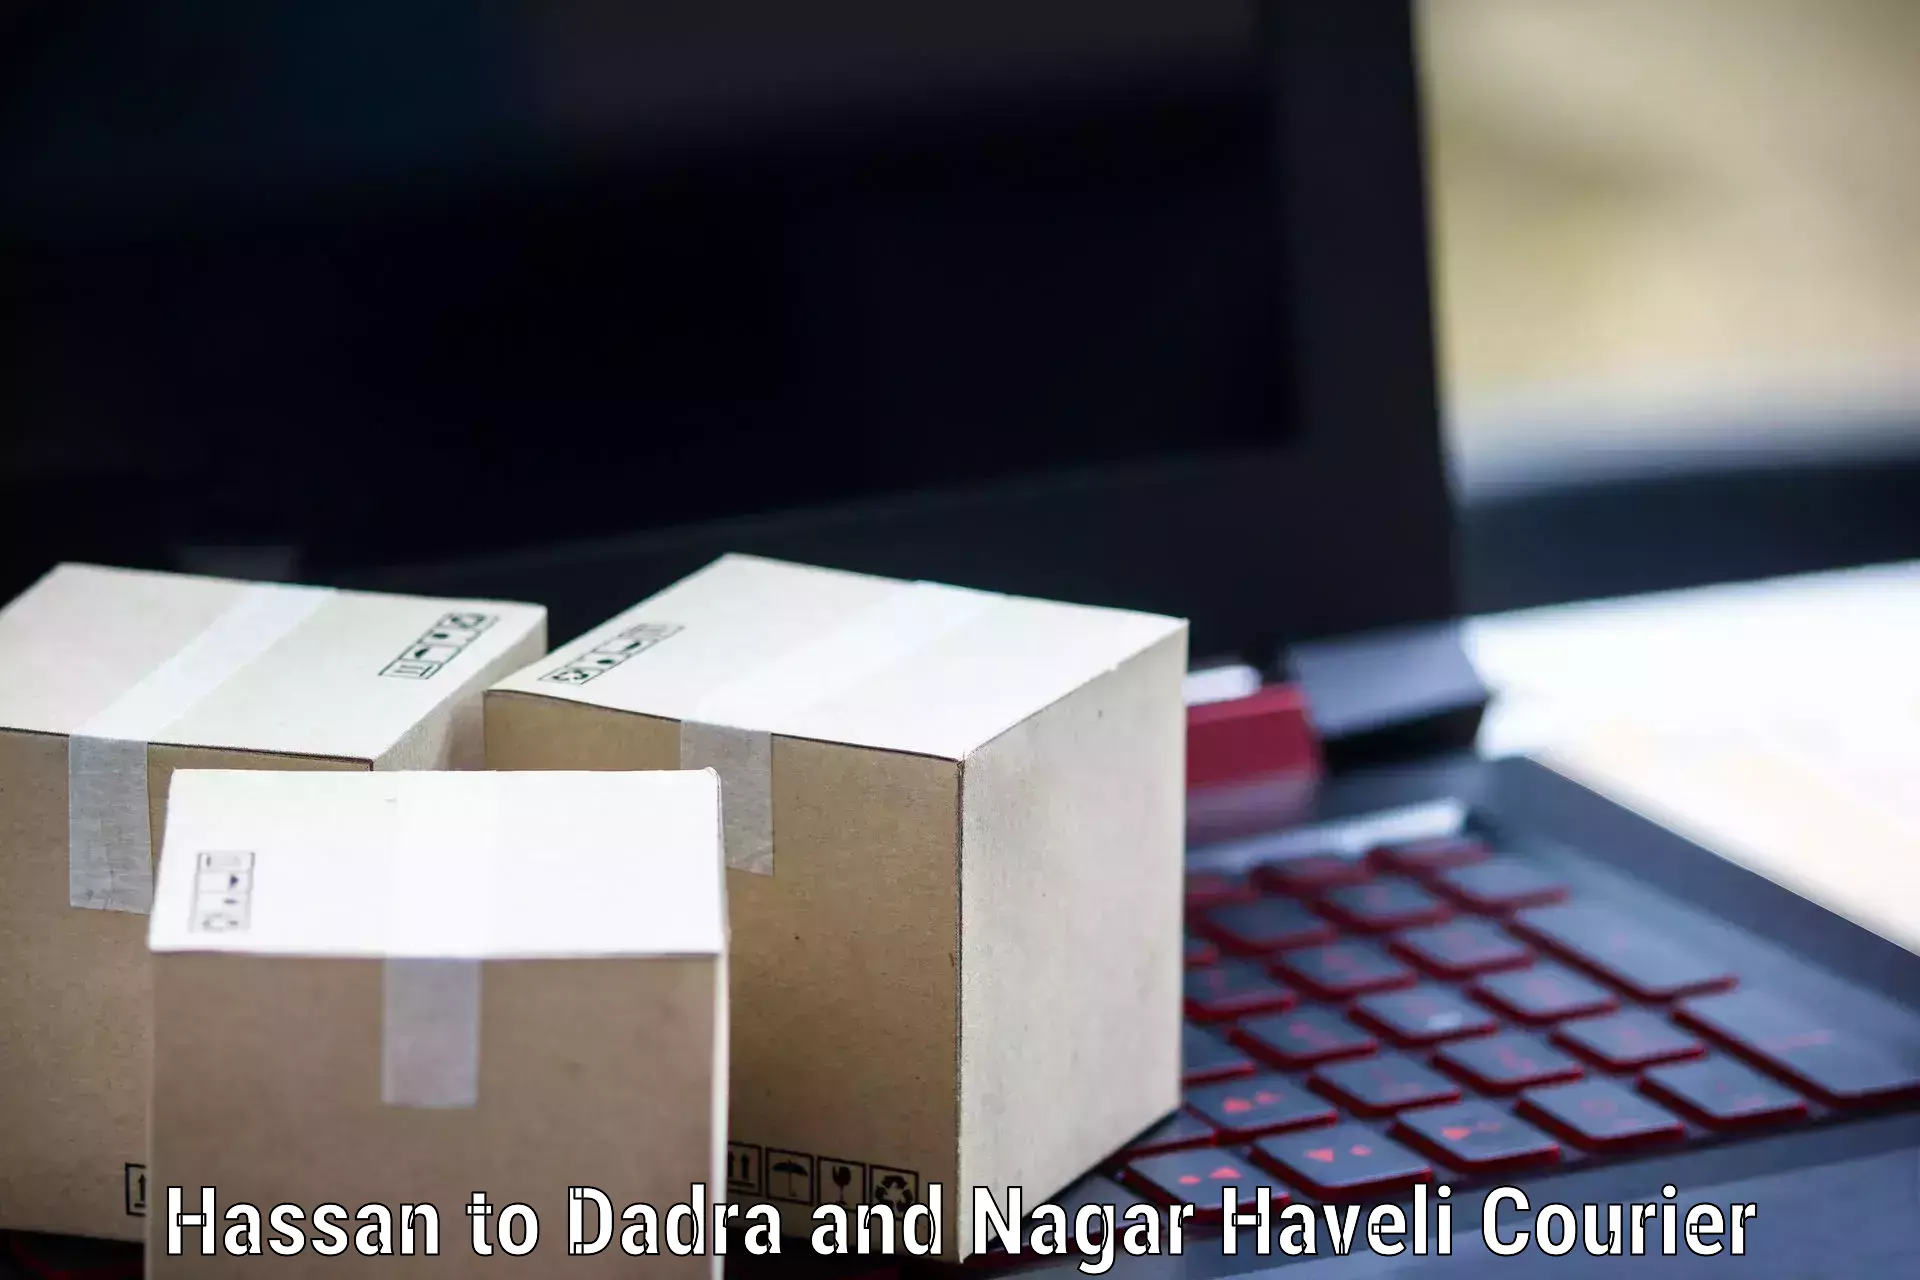 Online shipping calculator in Hassan to Dadra and Nagar Haveli